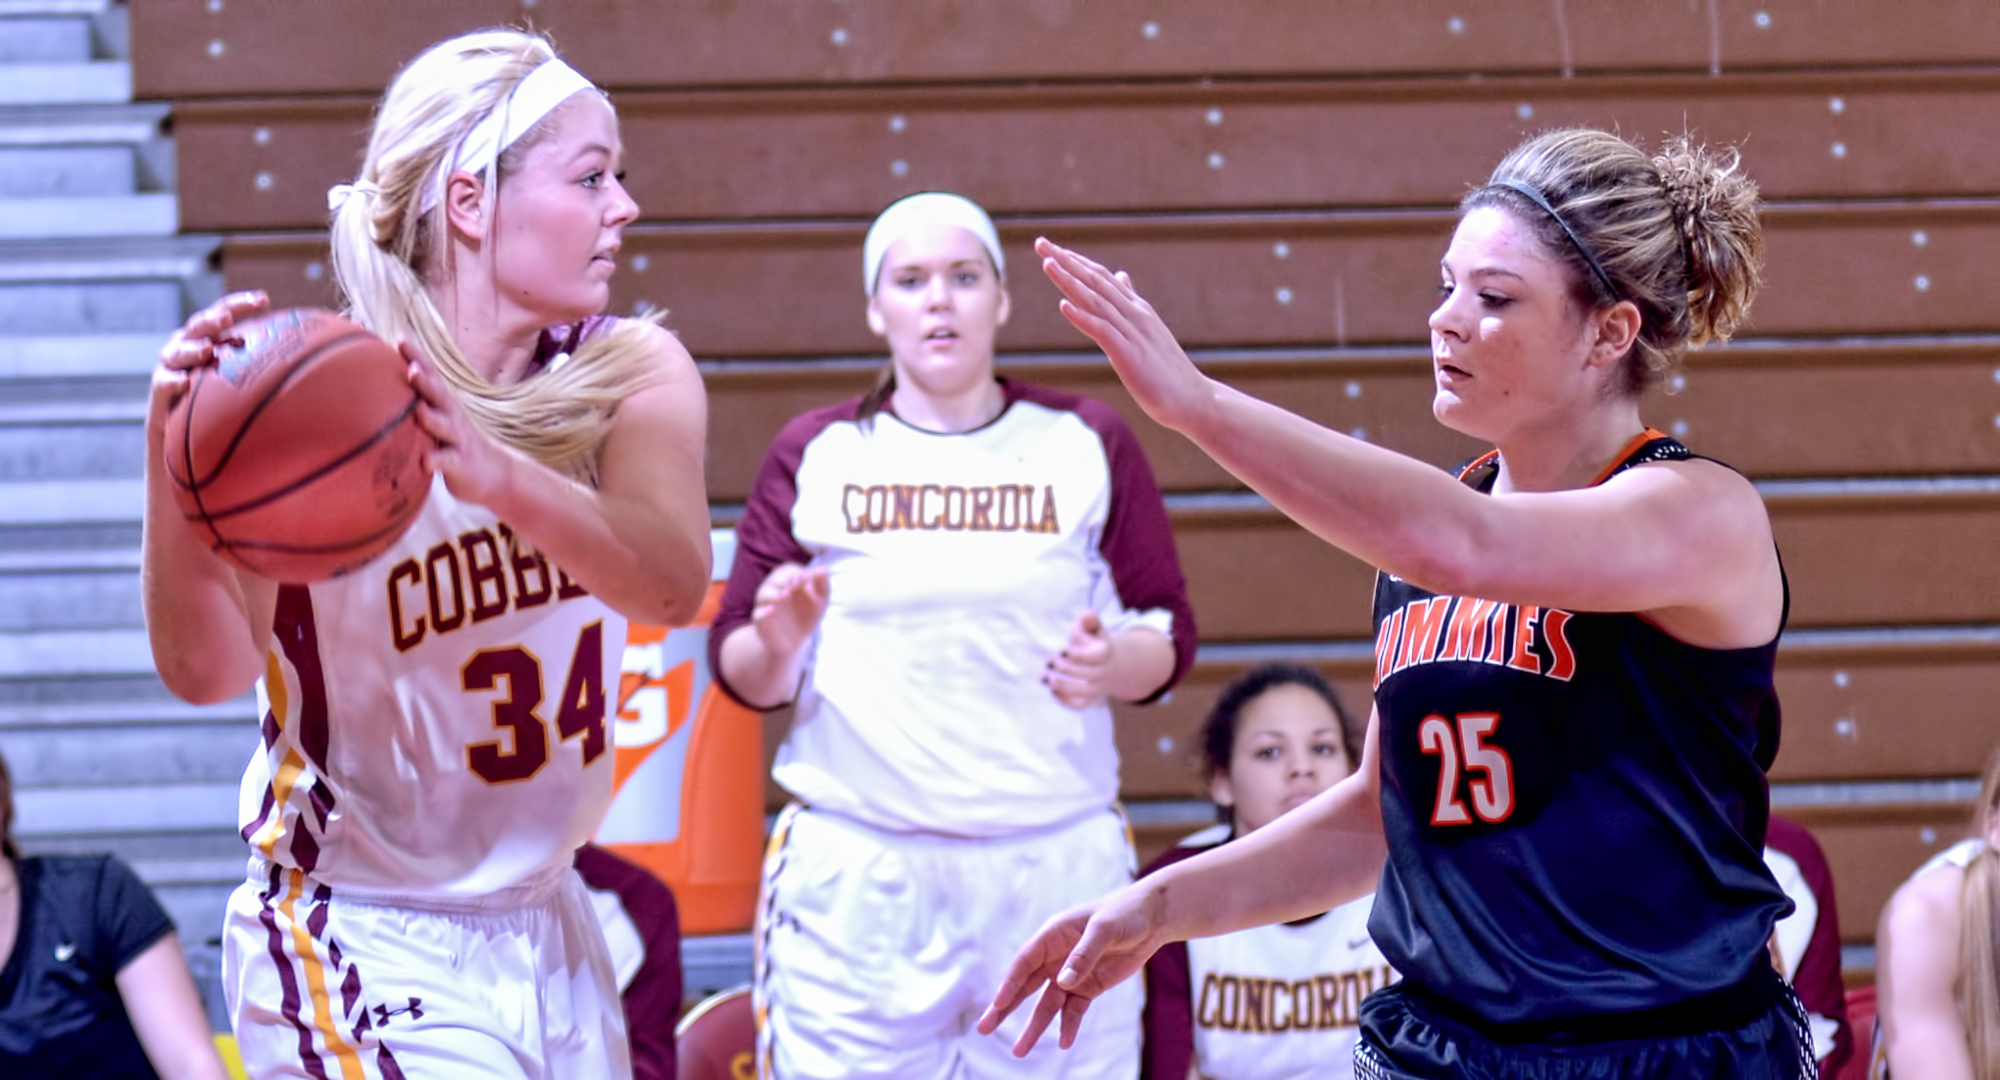 Junior Grace Wolhowe led the Cobbers in scoring and rebounding in Concordia's game at Jamestown. Wolhowe had a career-high 14 points vs. the Jimmies.